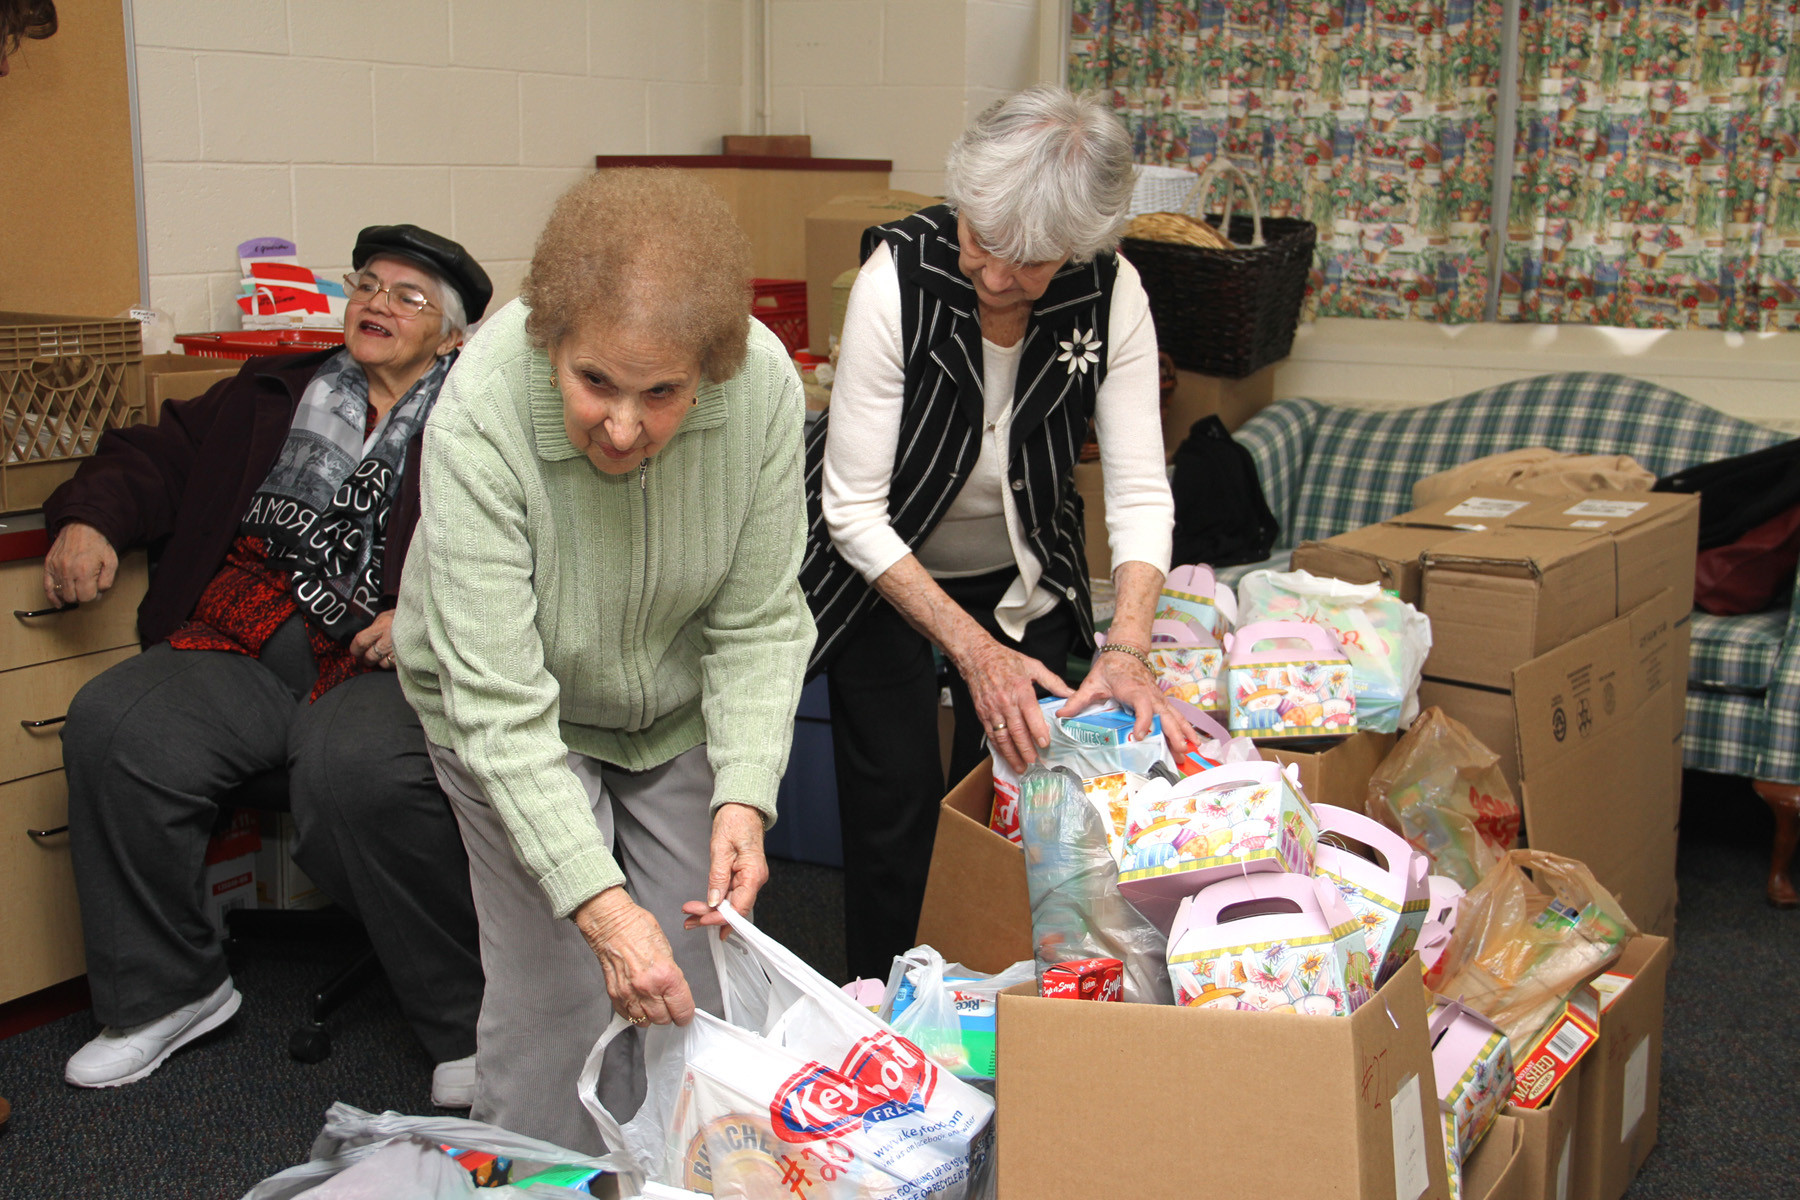 Parishioners Mary Gluck and Angelina Bonfiglio sorted through the boxes of food.